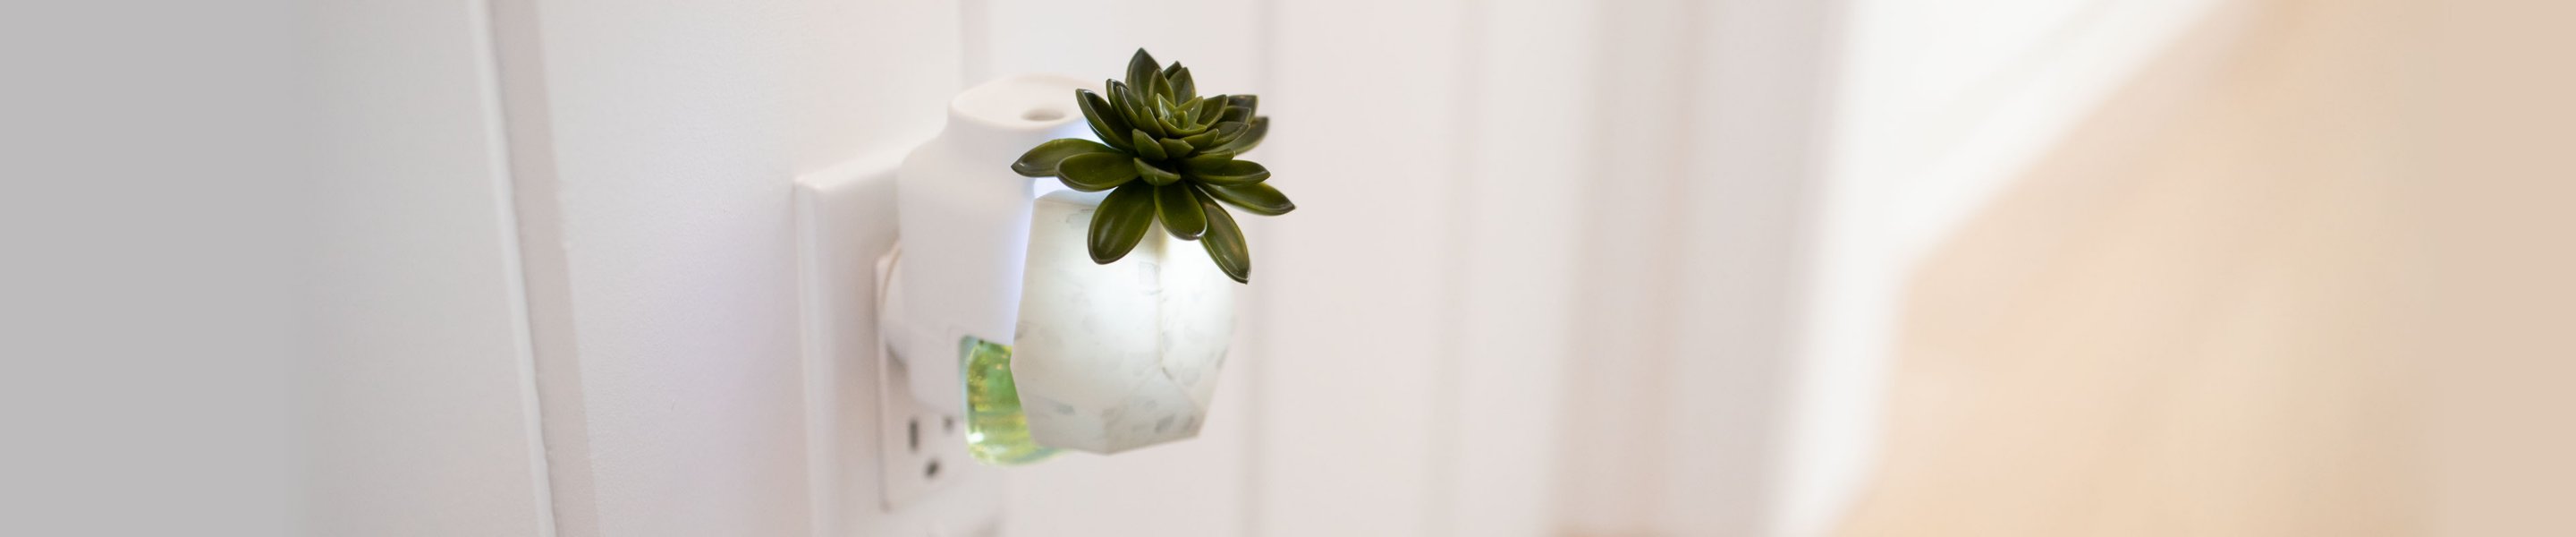 succulent in white pot scentplug diffuser in outlet